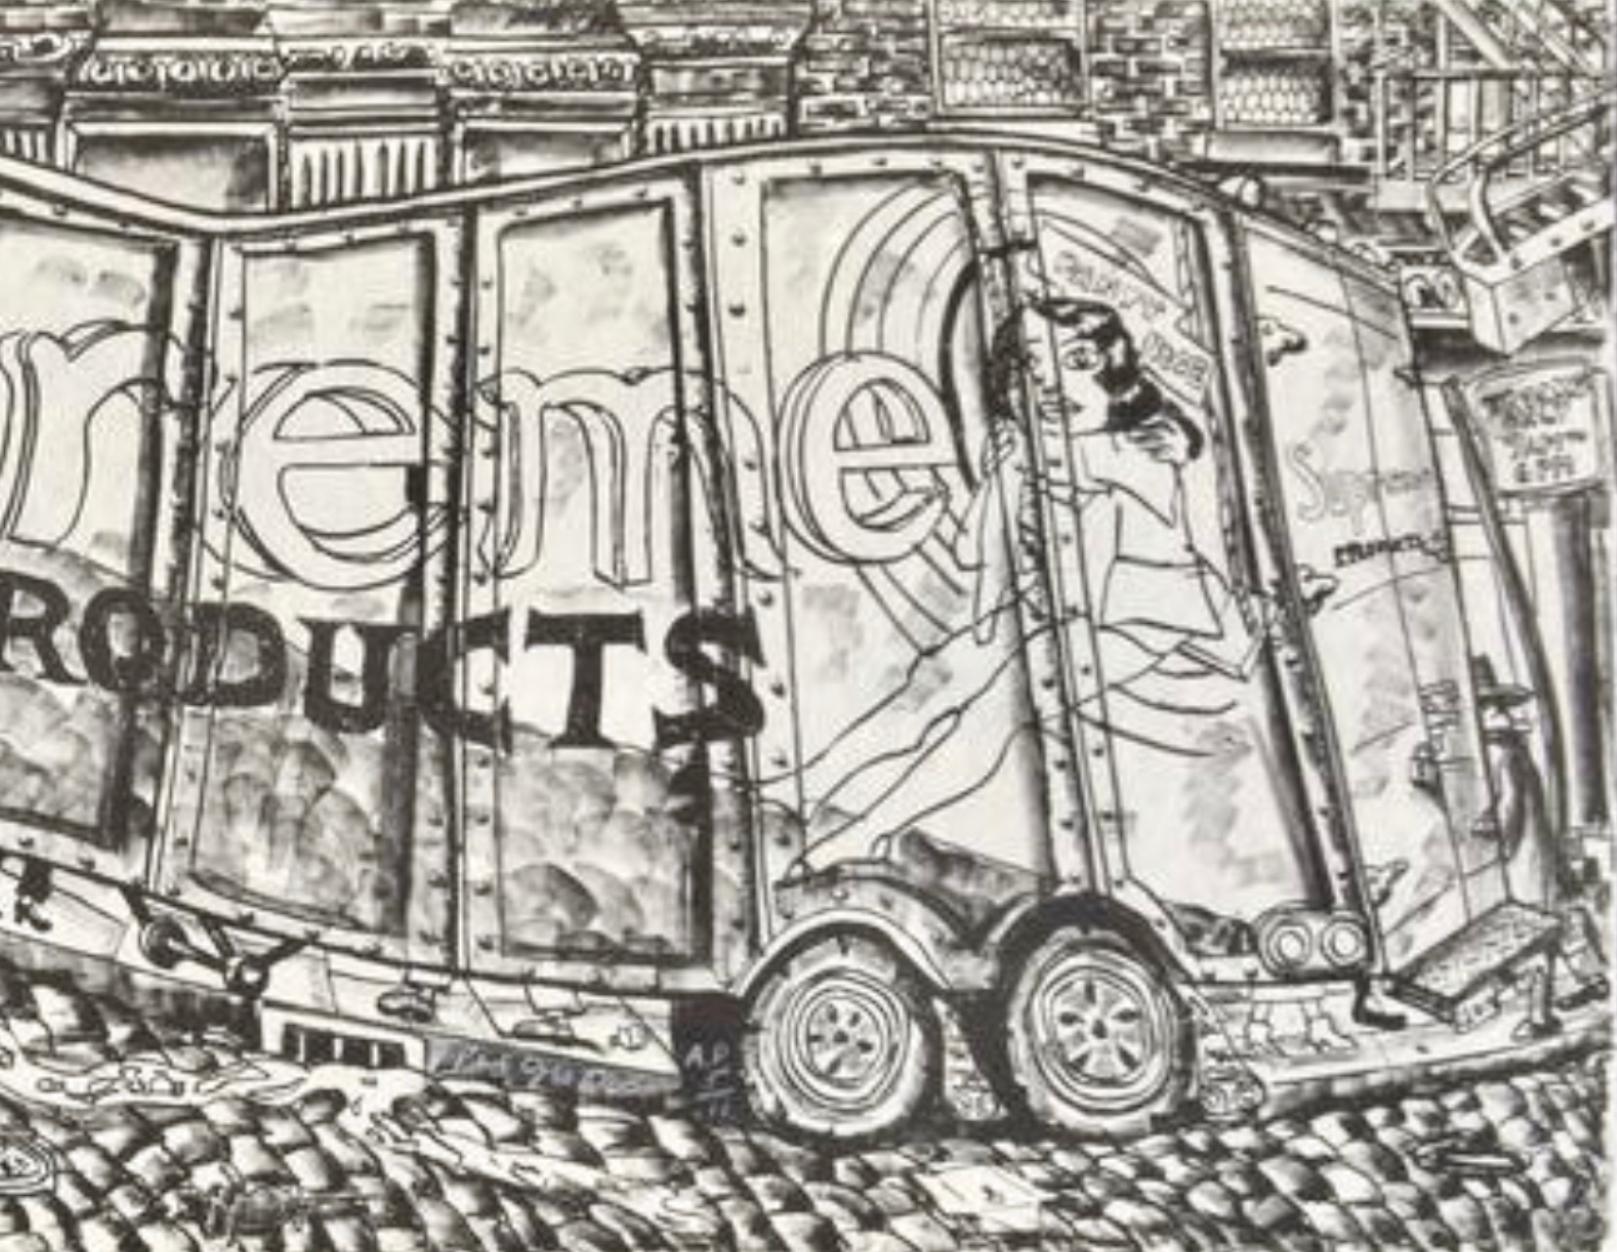 Artist: Red Grooms (1937)
Title: Truck I (VEL 105; Knestrick 77)
Year: 1979-1980
Medium: Lithograph, screenprint, rubber stamp impressions on Arches paper
Edition: 36, plus 11 artist’s proofs
Size: 24.25 x 62.25 inches
Condition: